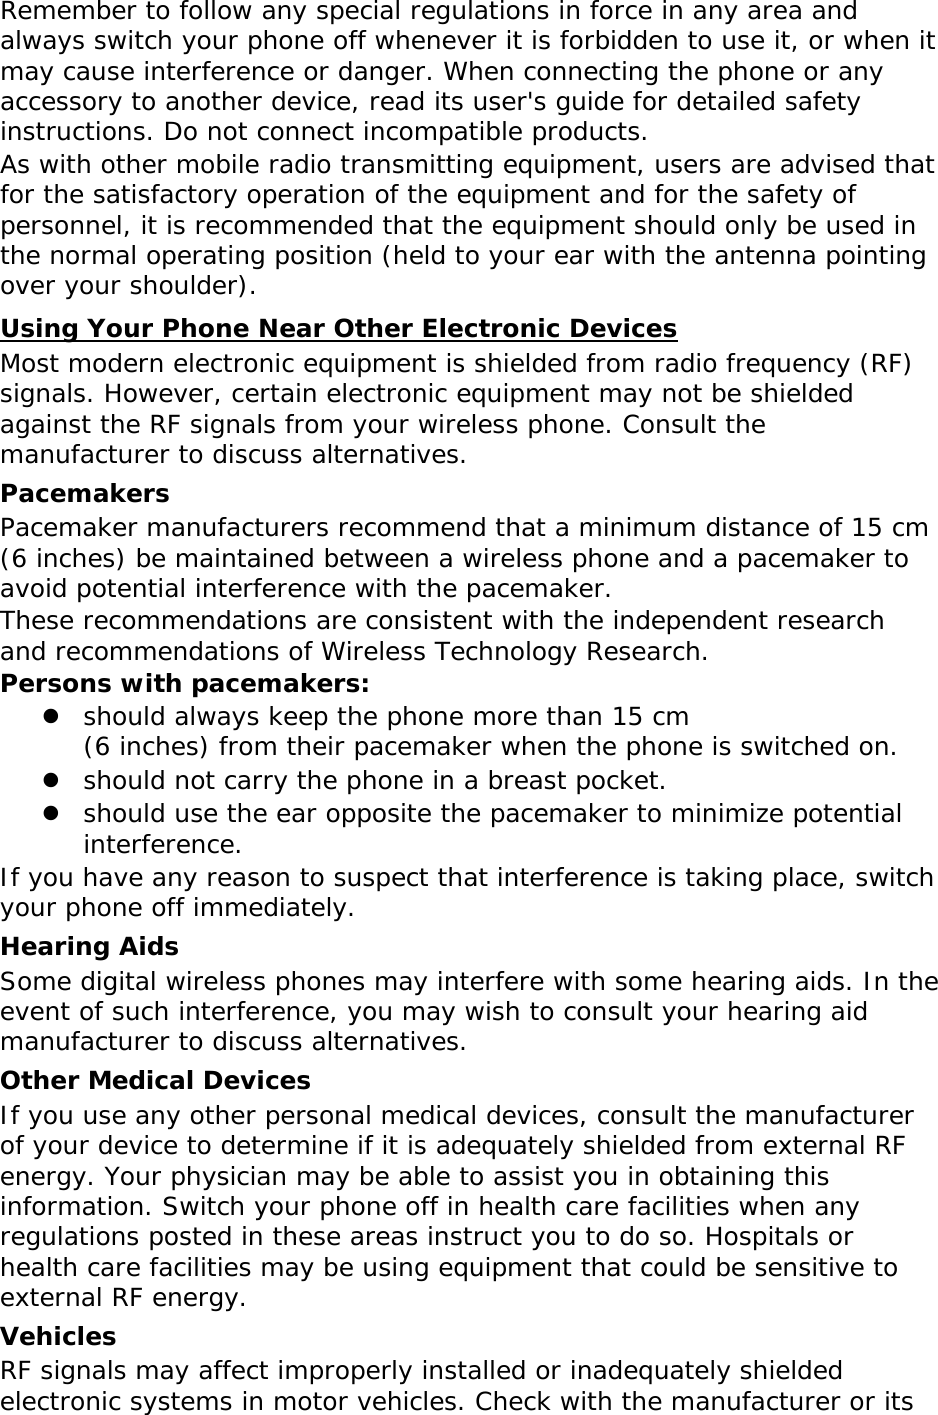 Remember to follow any special regulations in force in any area and always switch your phone off whenever it is forbidden to use it, or when it may cause interference or danger. When connecting the phone or any accessory to another device, read its user&apos;s guide for detailed safety instructions. Do not connect incompatible products. As with other mobile radio transmitting equipment, users are advised that for the satisfactory operation of the equipment and for the safety of personnel, it is recommended that the equipment should only be used in the normal operating position (held to your ear with the antenna pointing over your shoulder). Using Your Phone Near Other Electronic Devices Most modern electronic equipment is shielded from radio frequency (RF) signals. However, certain electronic equipment may not be shielded against the RF signals from your wireless phone. Consult the manufacturer to discuss alternatives. Pacemakers Pacemaker manufacturers recommend that a minimum distance of 15 cm (6 inches) be maintained between a wireless phone and a pacemaker to avoid potential interference with the pacemaker. These recommendations are consistent with the independent research and recommendations of Wireless Technology Research. Persons with pacemakers: z should always keep the phone more than 15 cm  (6 inches) from their pacemaker when the phone is switched on. z should not carry the phone in a breast pocket. z should use the ear opposite the pacemaker to minimize potential interference. If you have any reason to suspect that interference is taking place, switch your phone off immediately. Hearing Aids Some digital wireless phones may interfere with some hearing aids. In the event of such interference, you may wish to consult your hearing aid manufacturer to discuss alternatives. Other Medical Devices If you use any other personal medical devices, consult the manufacturer of your device to determine if it is adequately shielded from external RF energy. Your physician may be able to assist you in obtaining this information. Switch your phone off in health care facilities when any regulations posted in these areas instruct you to do so. Hospitals or health care facilities may be using equipment that could be sensitive to external RF energy. Vehicles RF signals may affect improperly installed or inadequately shielded electronic systems in motor vehicles. Check with the manufacturer or its 